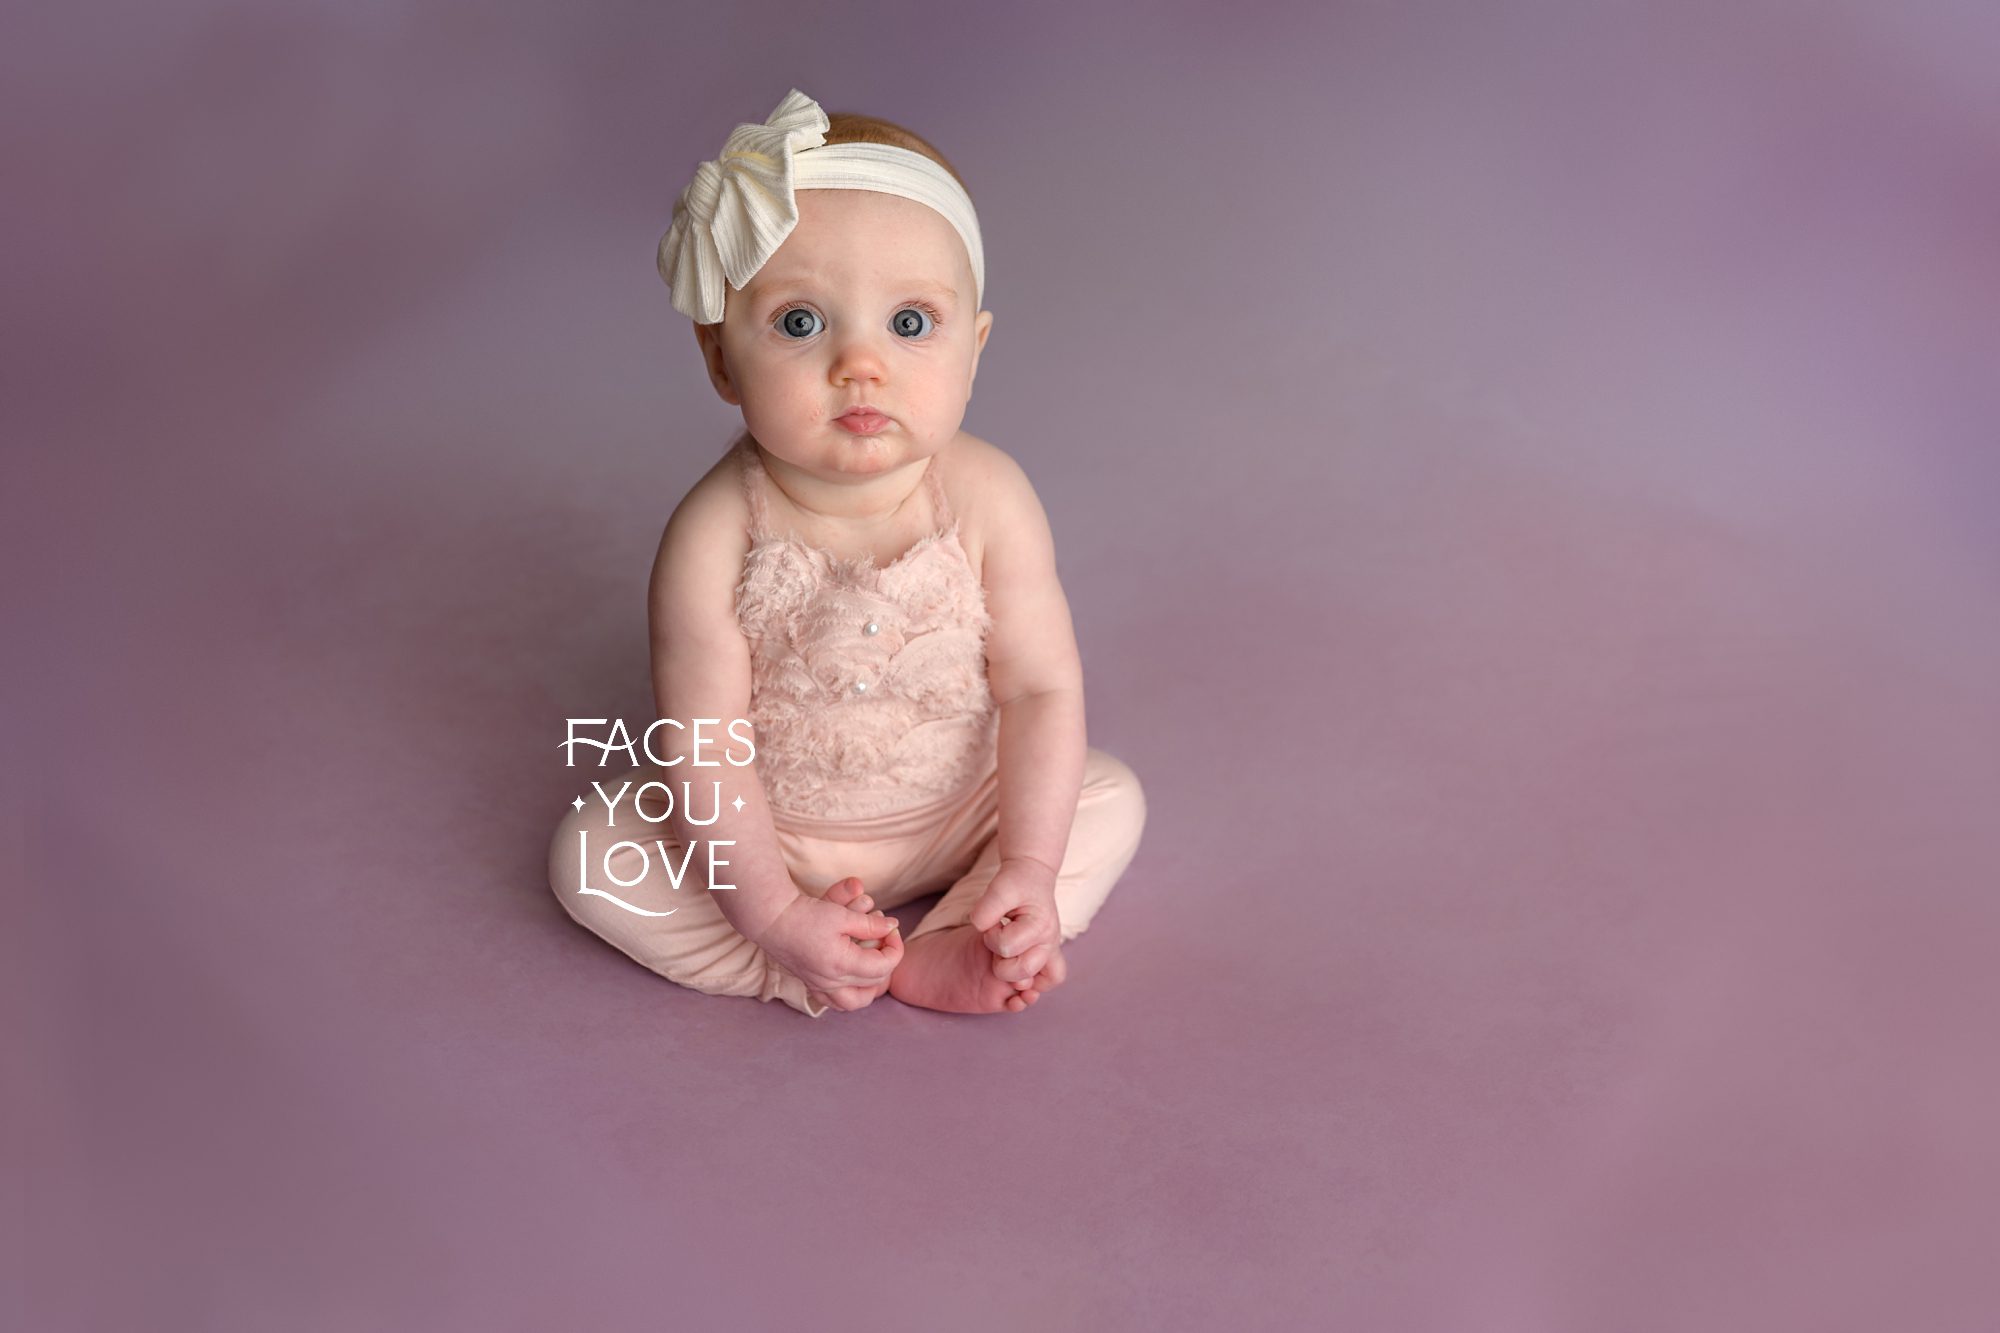 Six month old baby girl, sitting and holding her toes, on a pink backdrop. She's wearing a headband and has a serious expression. Photographed in Kansas City by Faces You Love Photography.